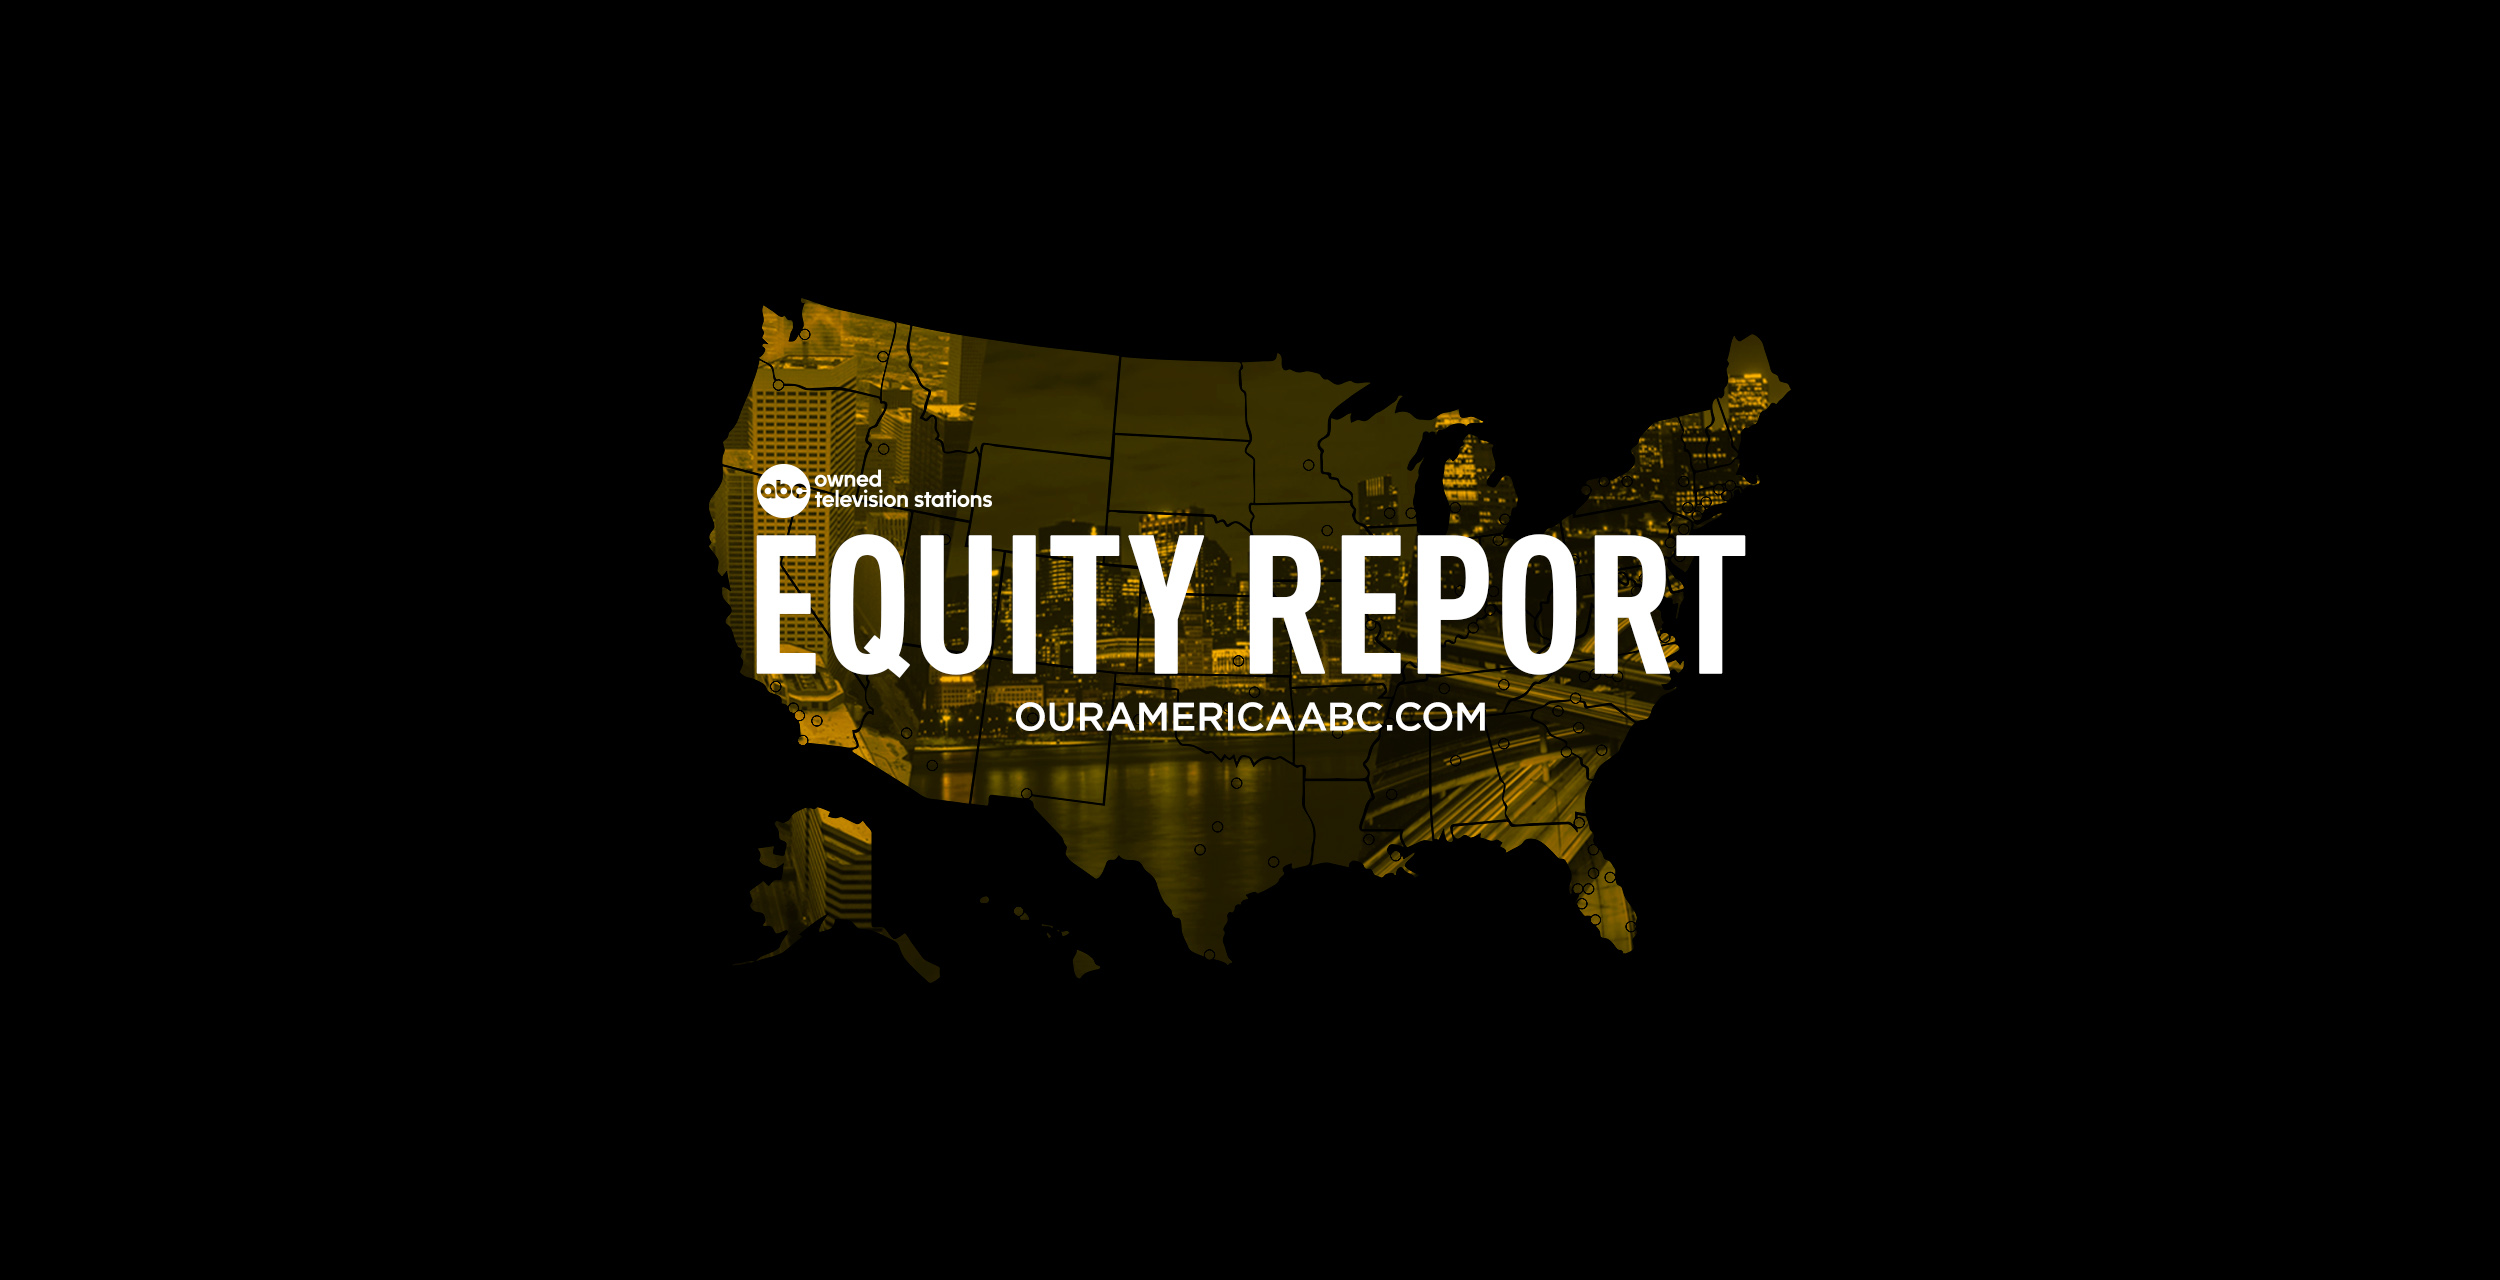 PHOTO: Equity Report